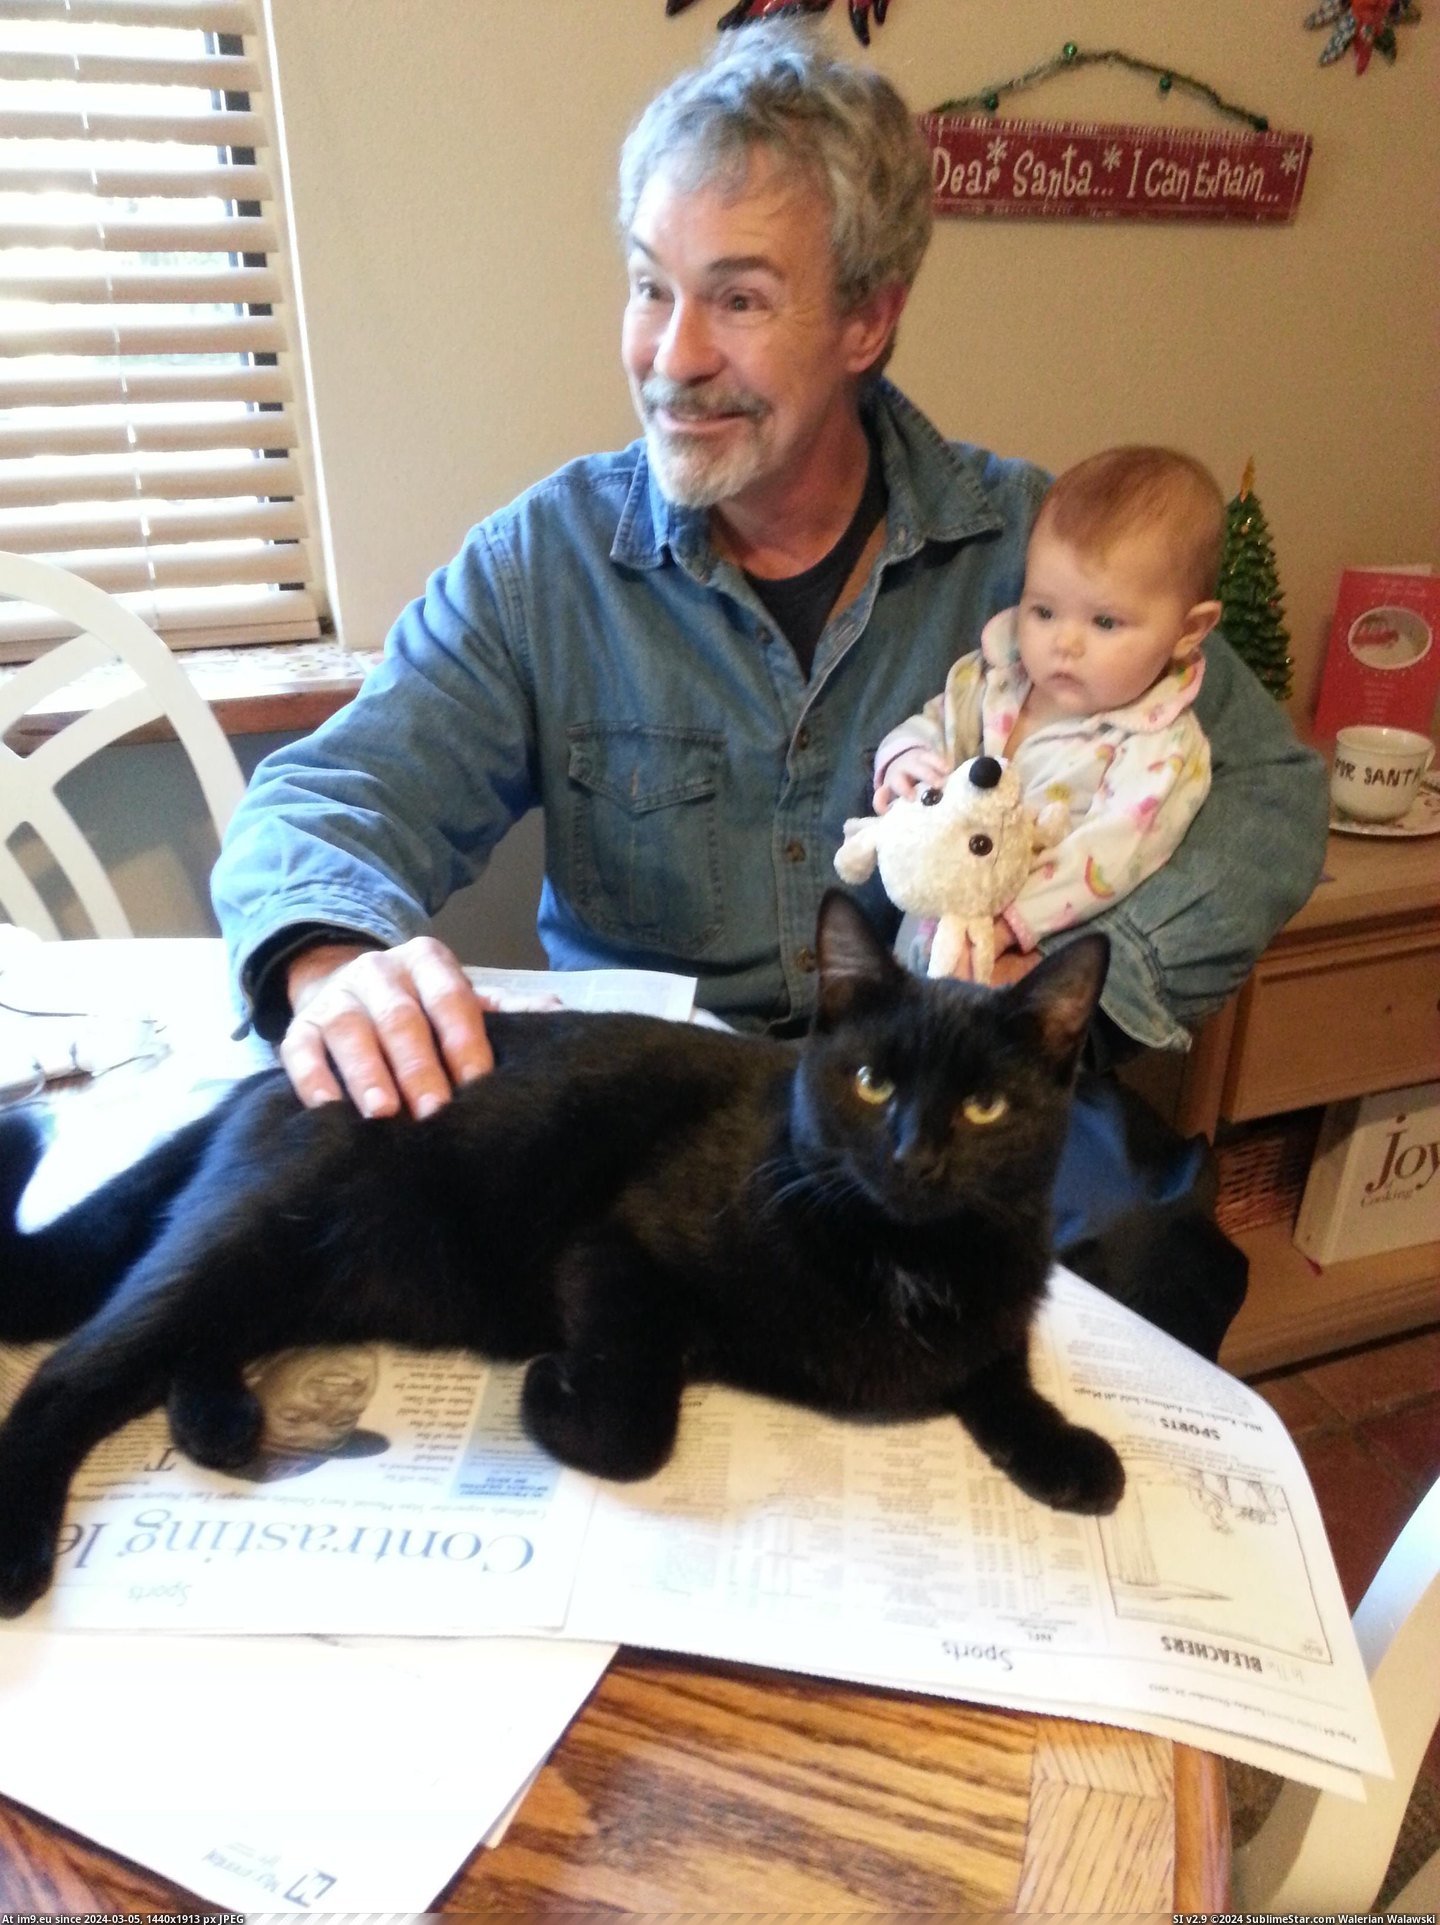 #Cats #Cat #Morning #Christmas #Lap #Shiba #Reads #Met #Paper #Sits #Stepdad [Cats] Every morning my stepdad's cat, Shiba, sits in his lap and reads the paper with him. Back at Christmas, my stepdad met hi Pic. (Obraz z album My r/CATS favs))